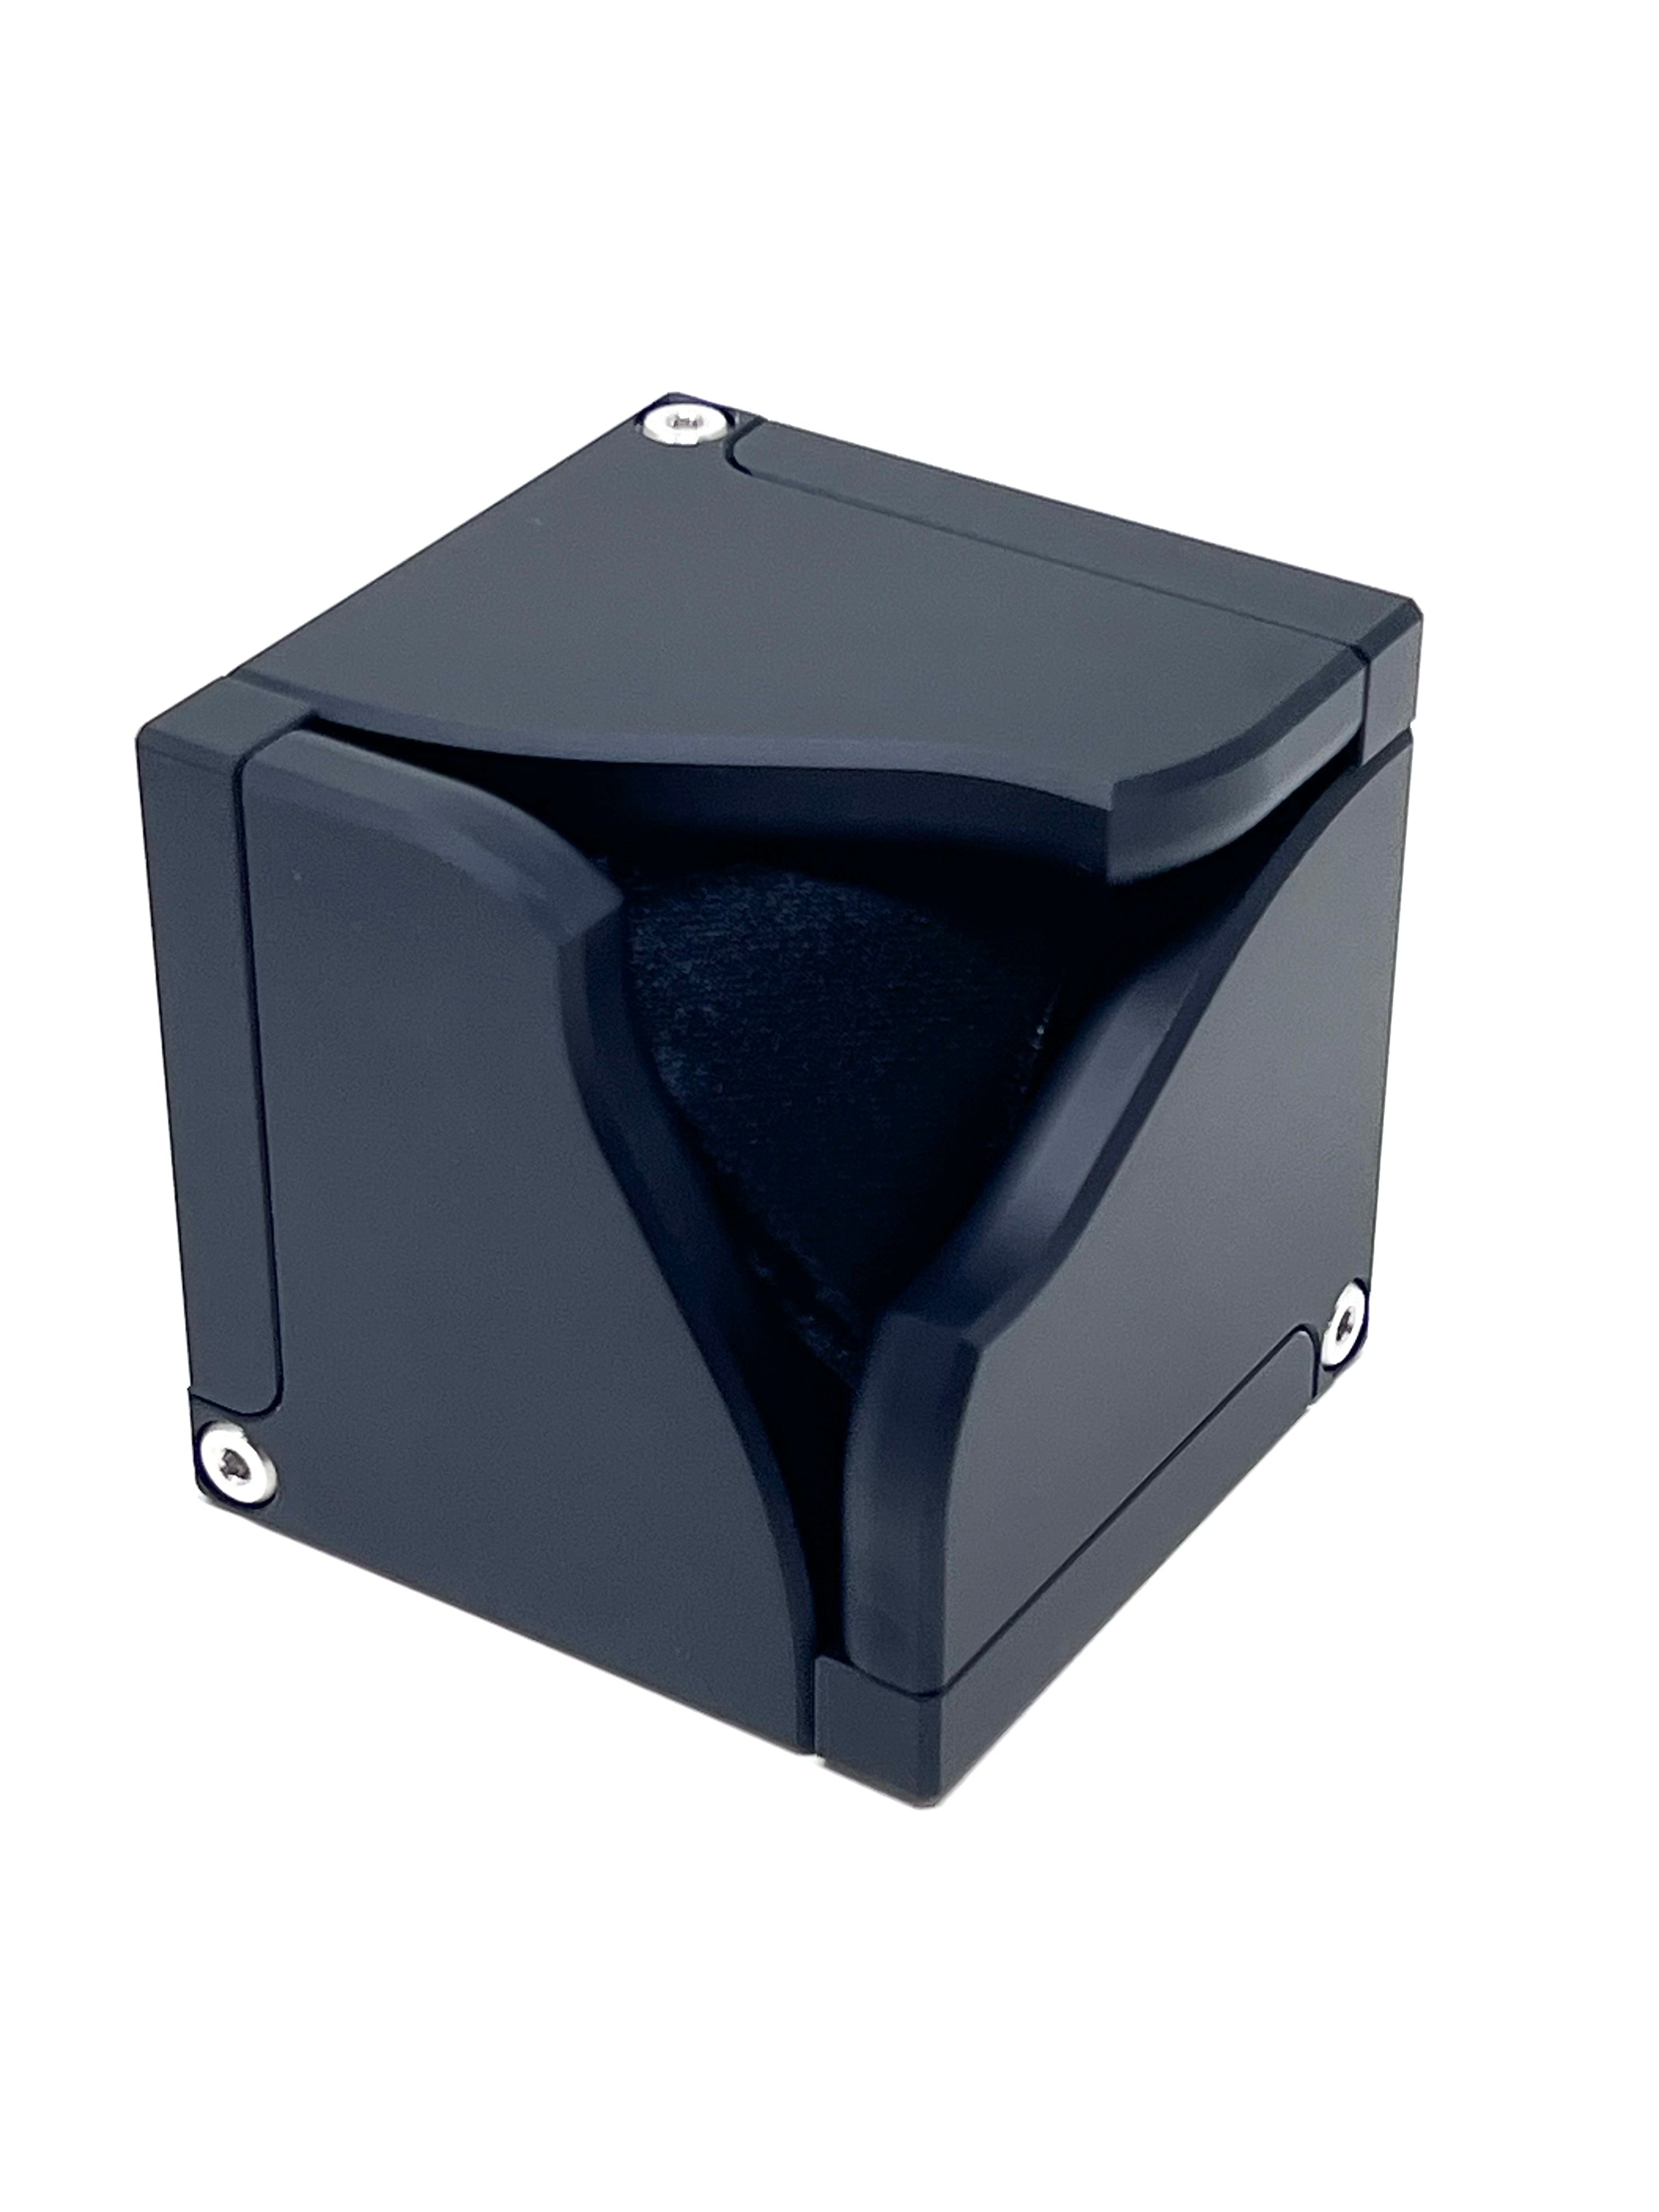 Kinetacube Ring Box - First Extended Edition